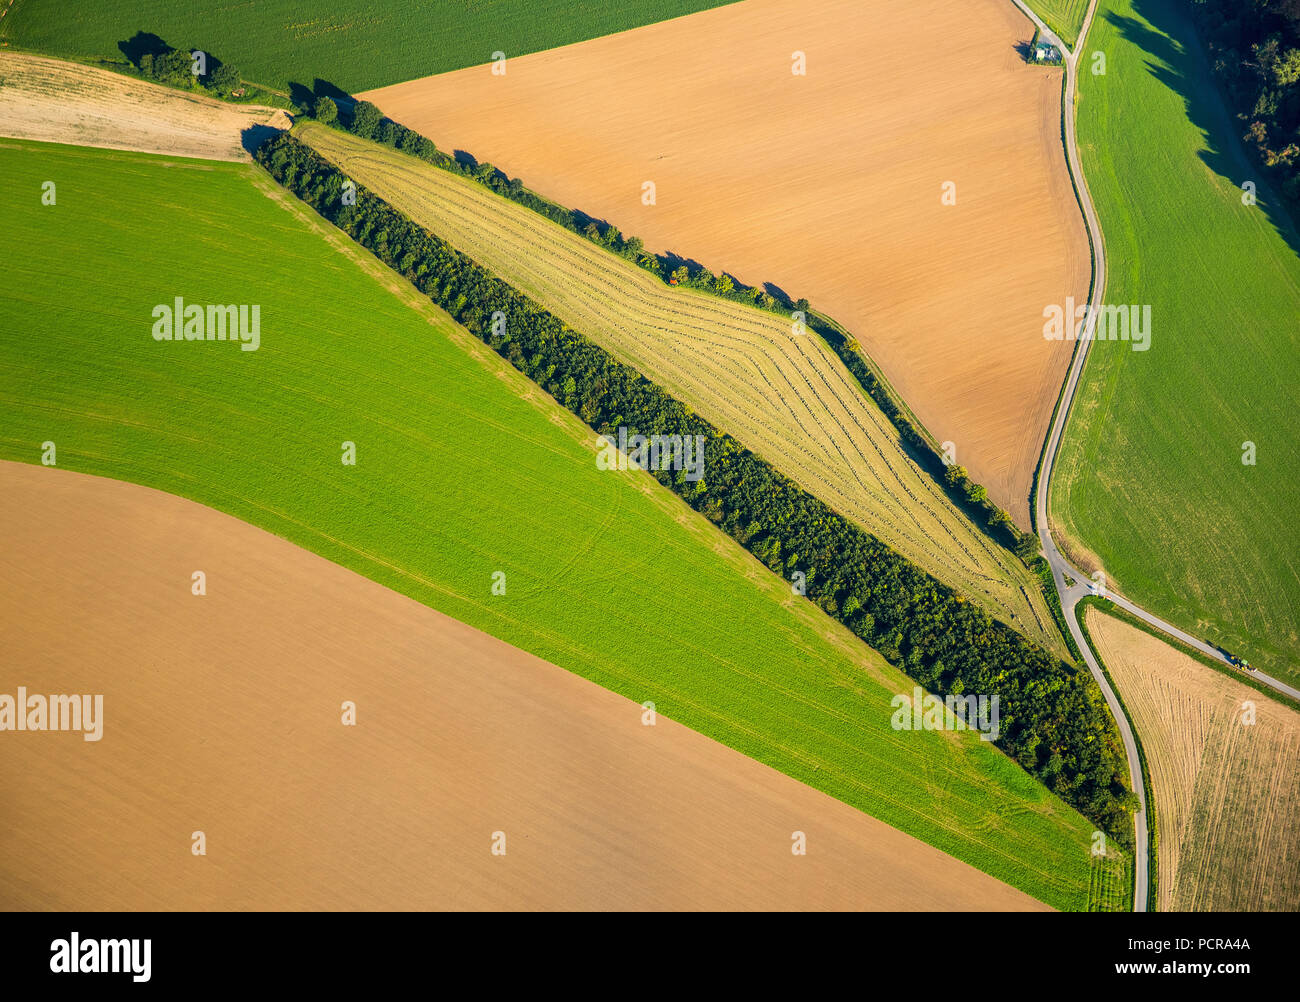 Tree row, bush row in a field, agriculture, Duisburg, Ruhr area, North Rhine-Westphalia, Germany Stock Photo